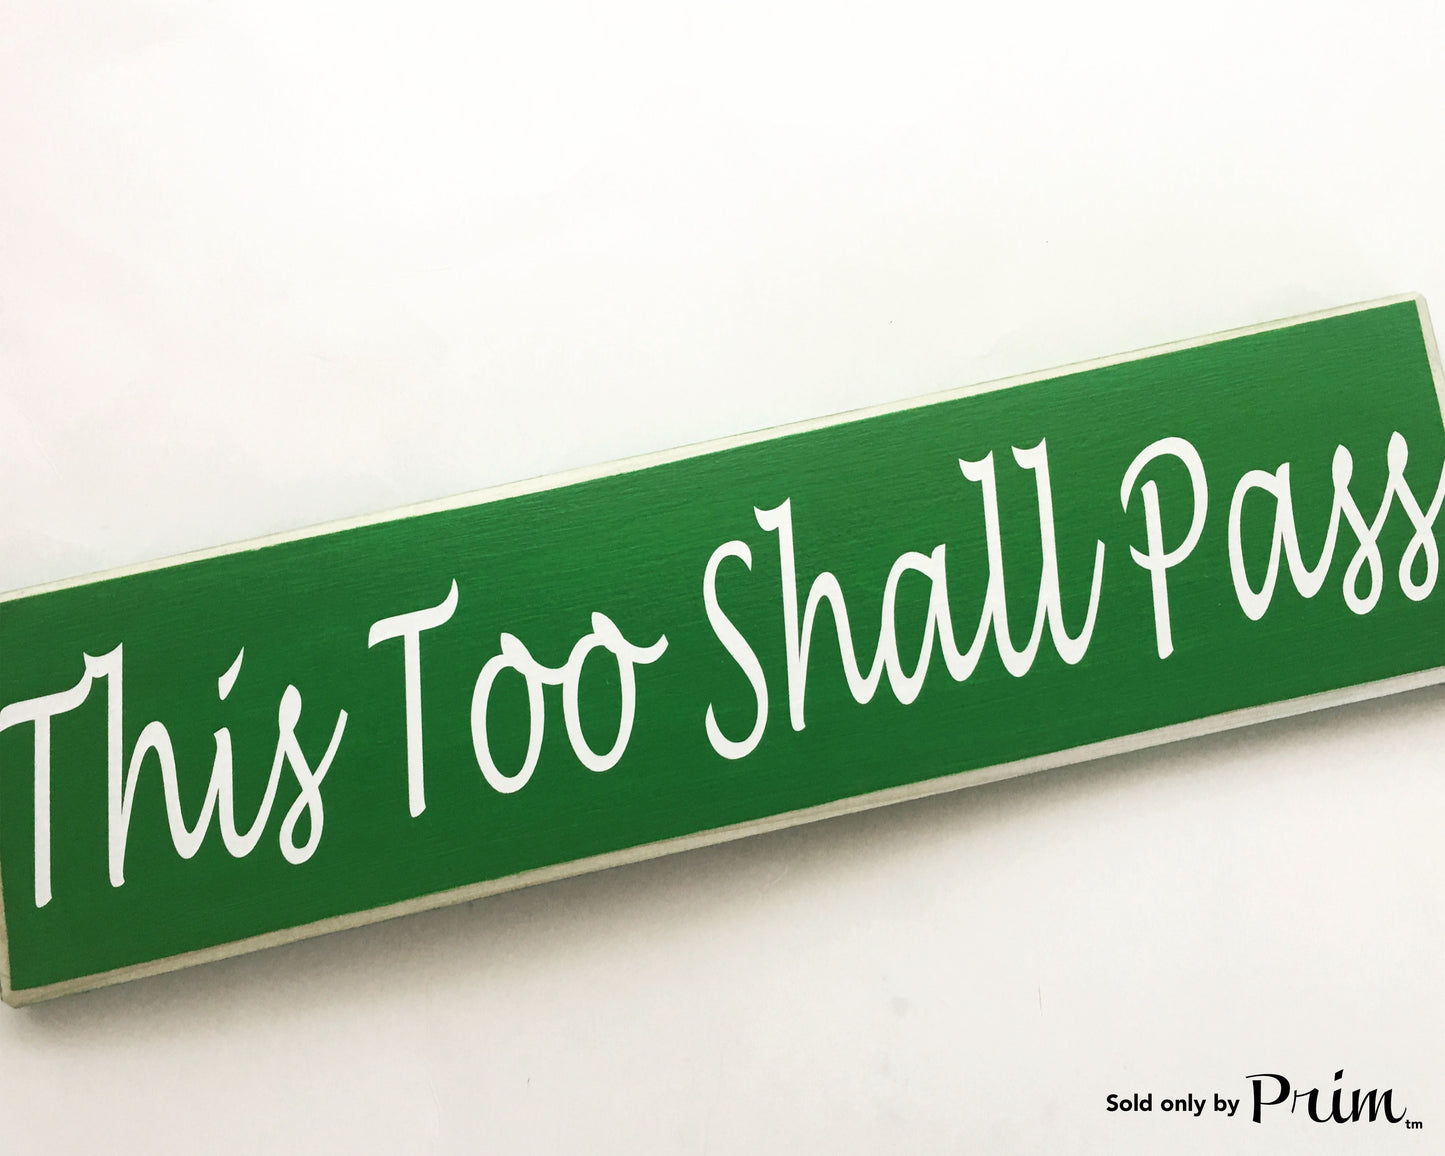 18x4 This Too Shall Pass Custom Wood Sign Motivational Positivity Future Happiness Success